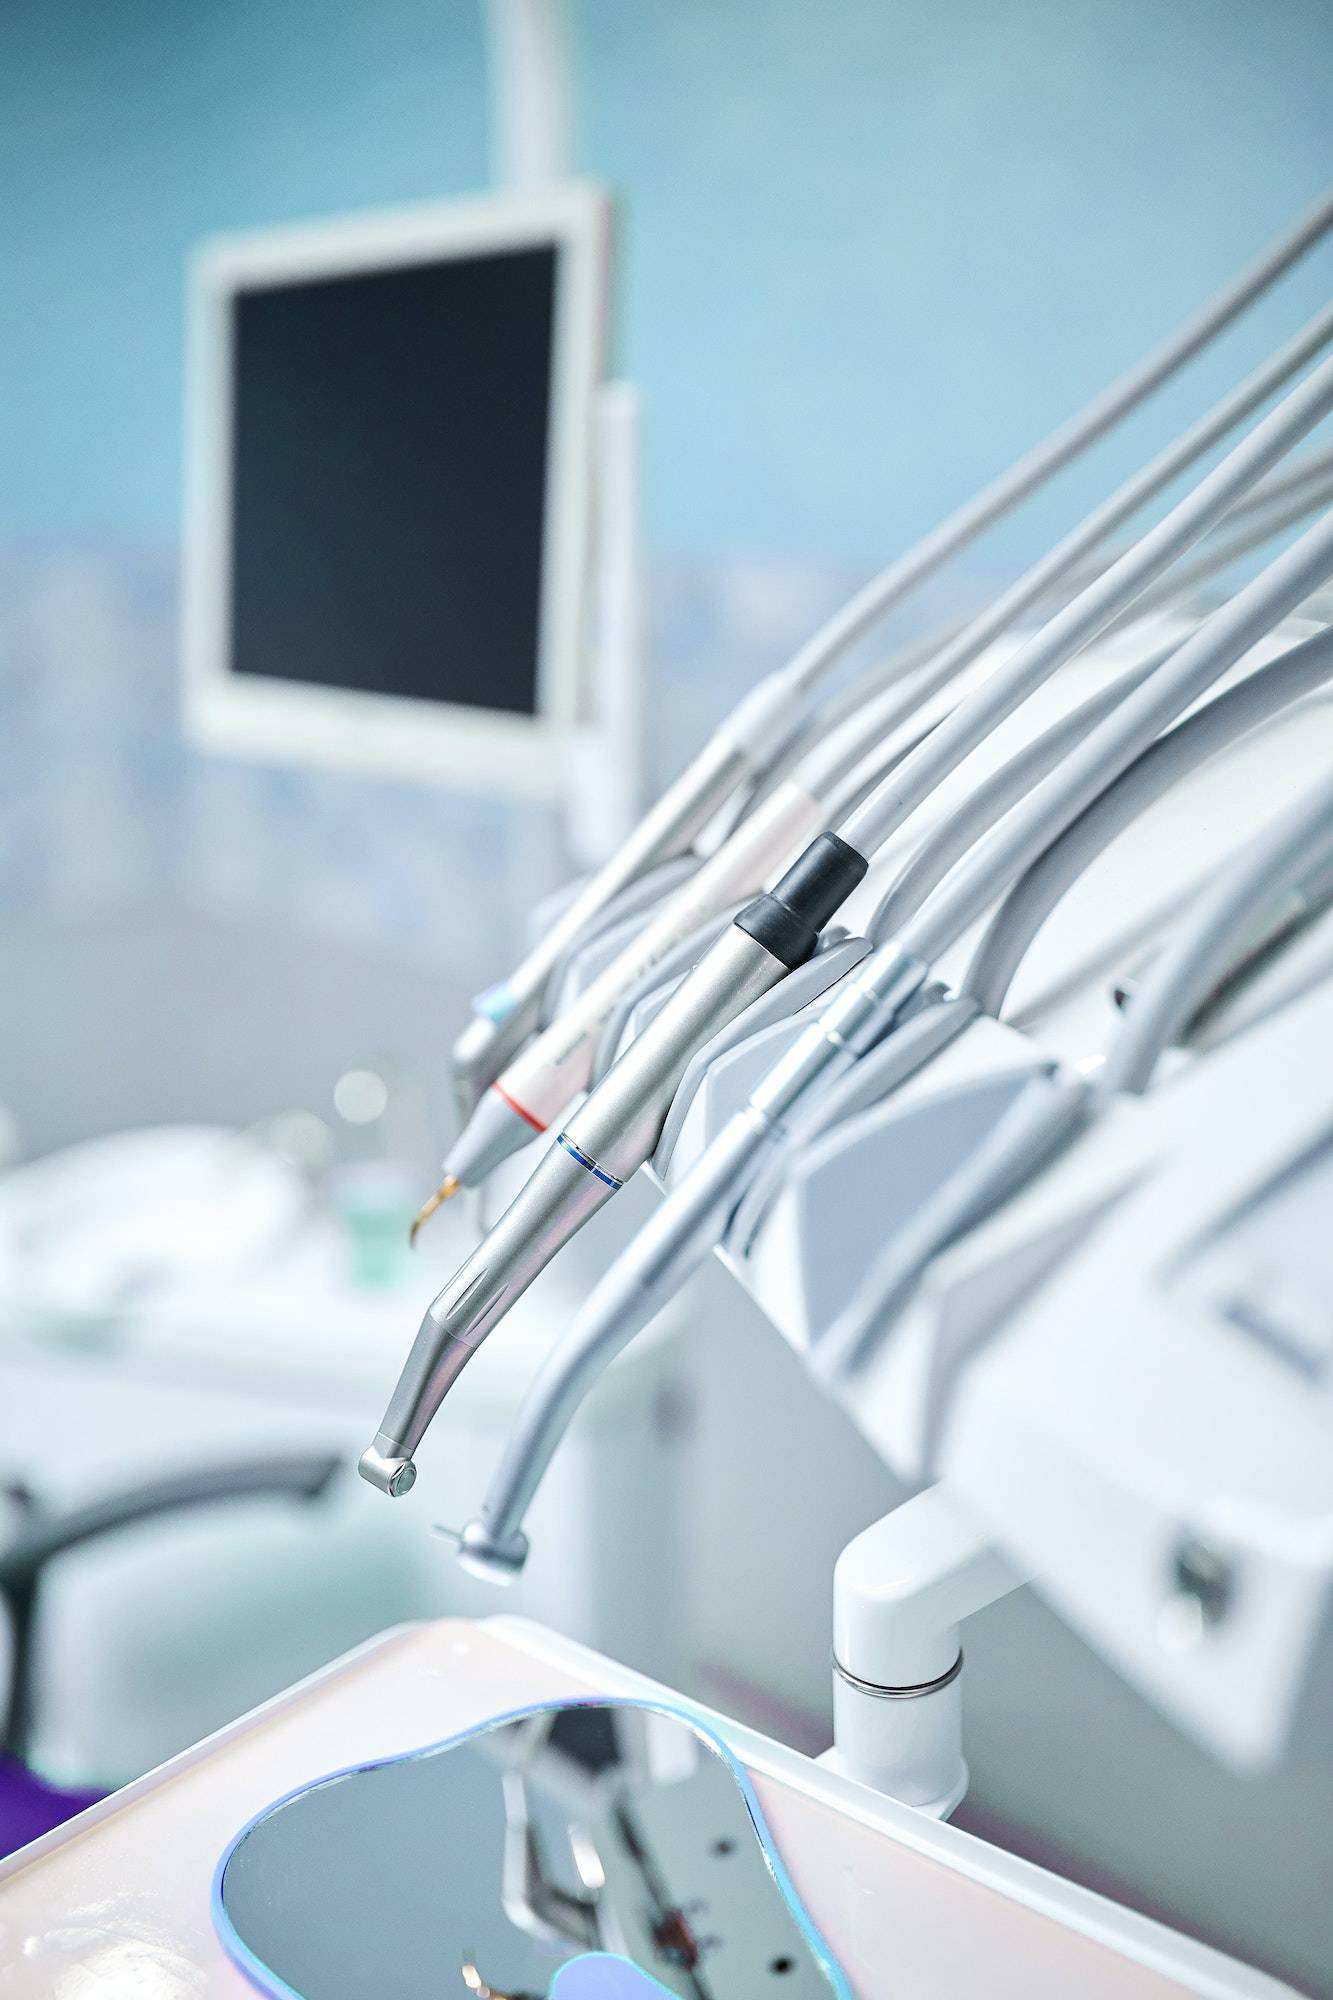 Modern metallic dentist tools and burnishers on a dentist chair